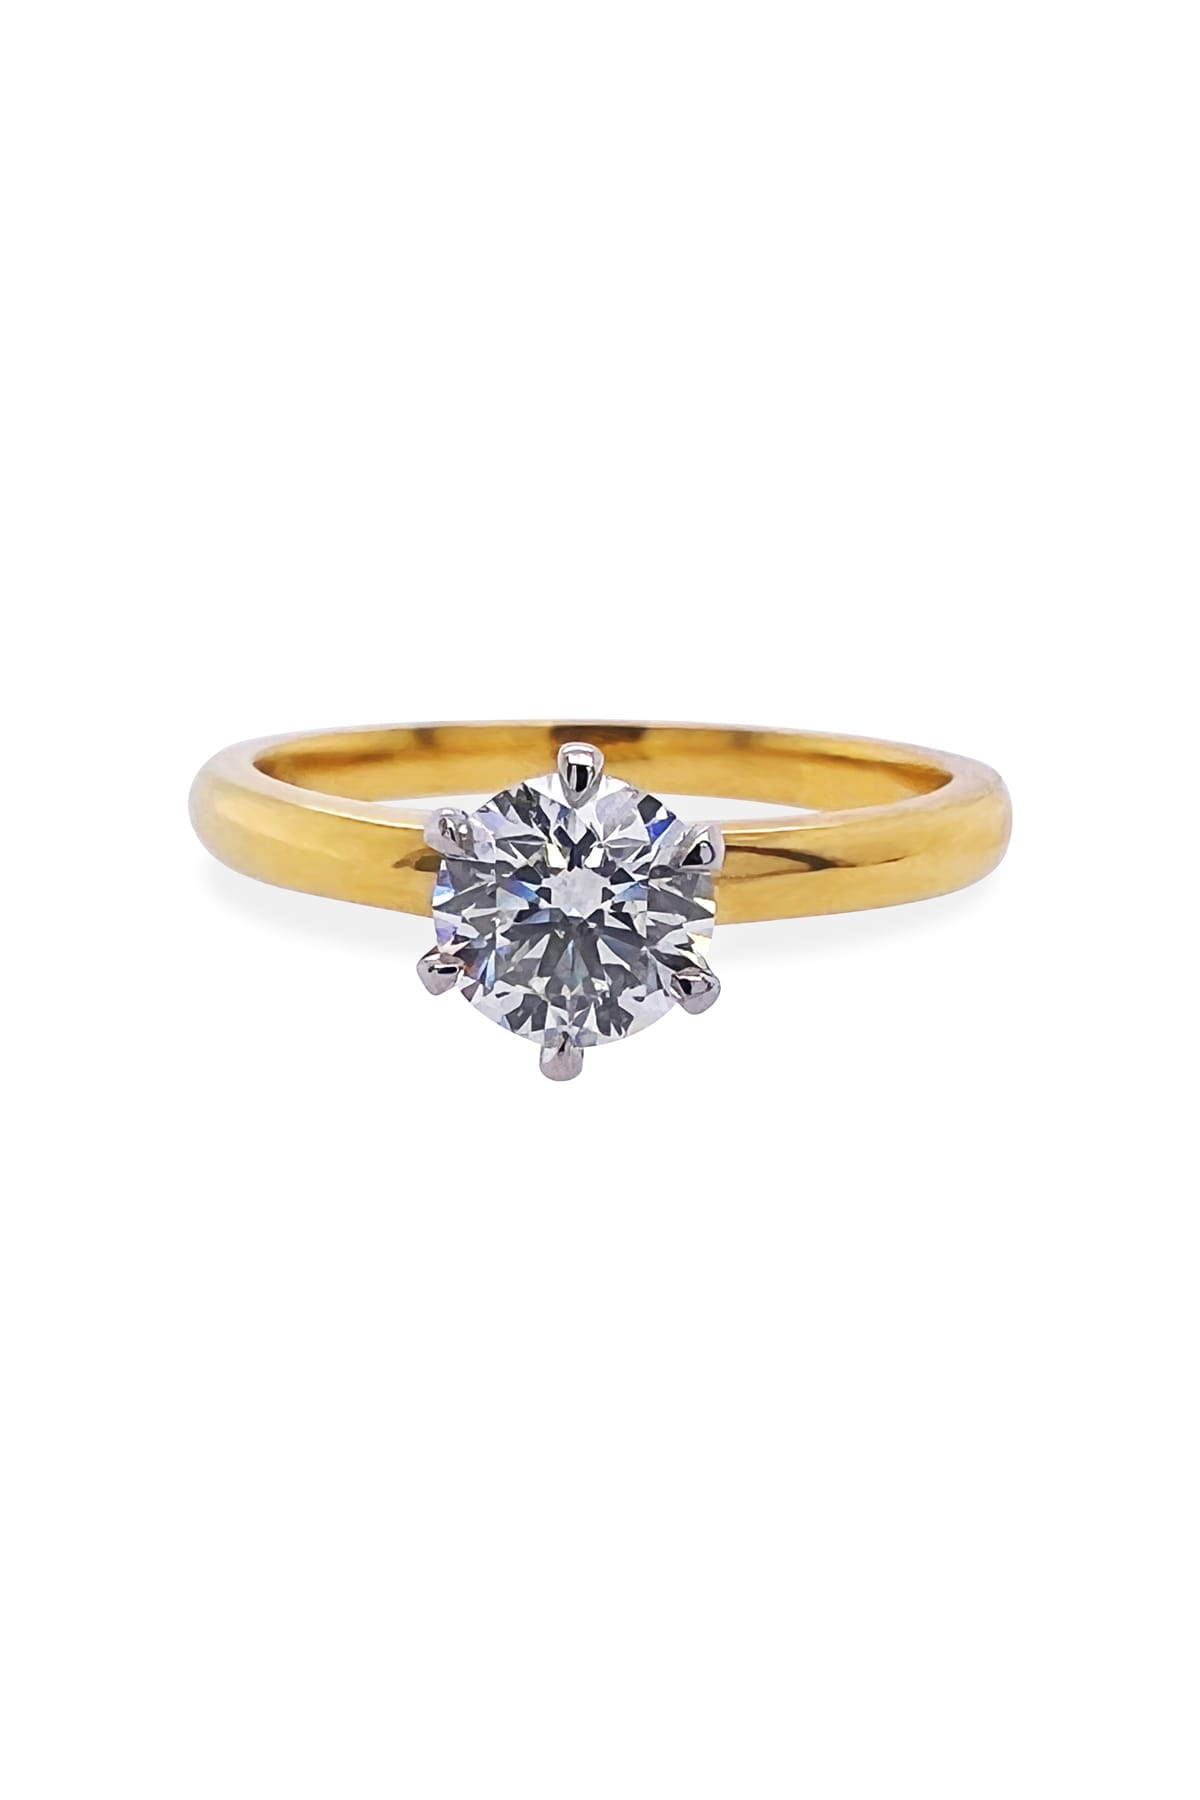 18 Carat Gold 6 Claw Diamond 0.70ct Solitaire Engagement Ring available at LeGassick Diamonds and Jewellery Gold Coast, Australia.